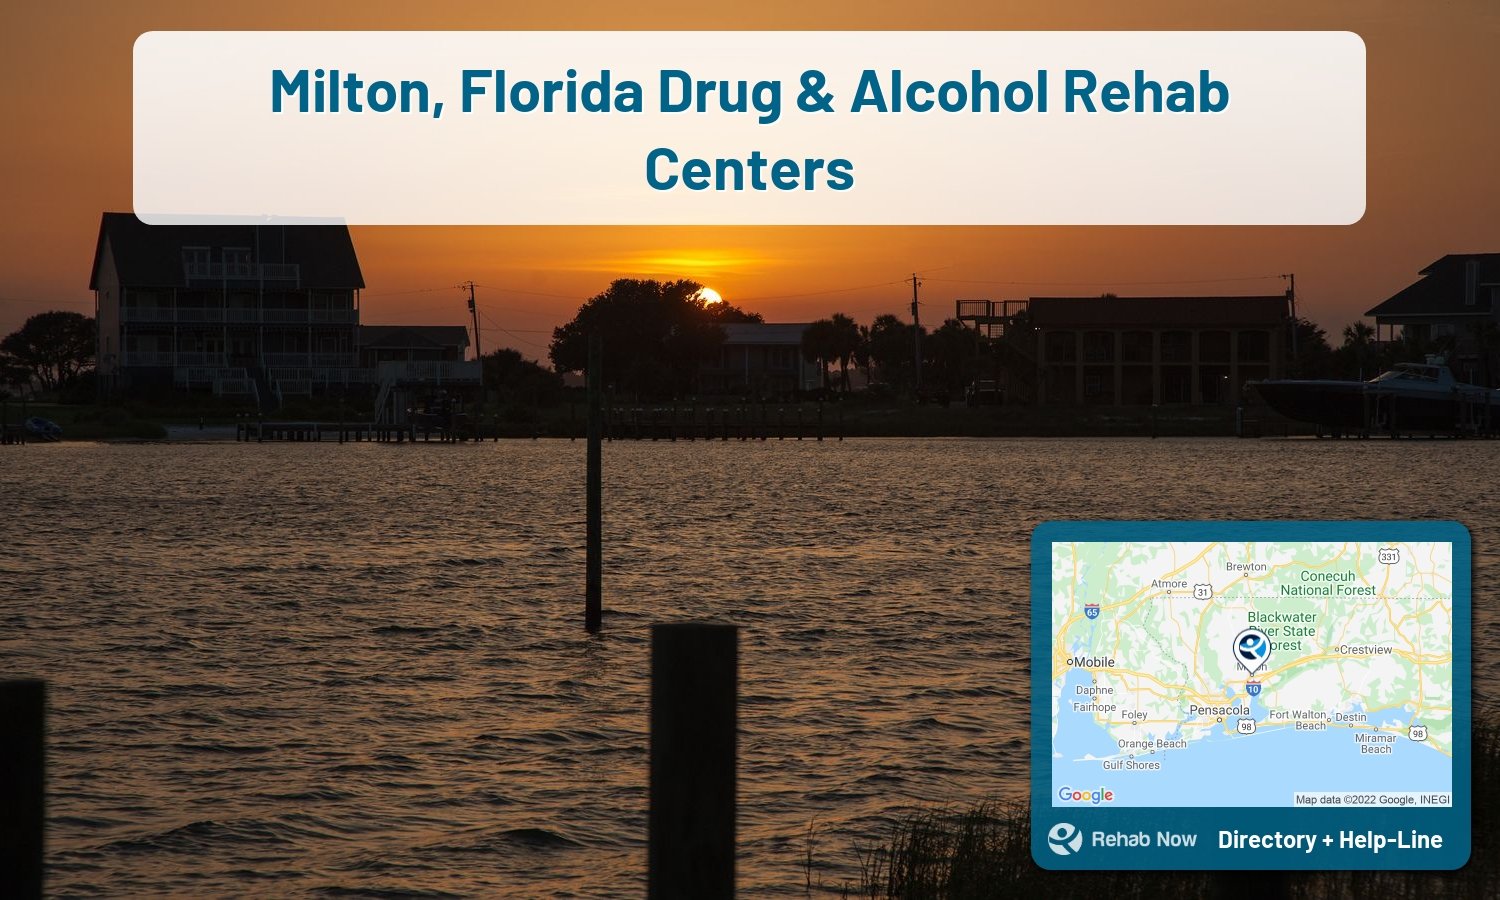 List of alcohol and drug treatment centers near you in Milton, Florida. Research certifications, programs, methods, pricing, and more.